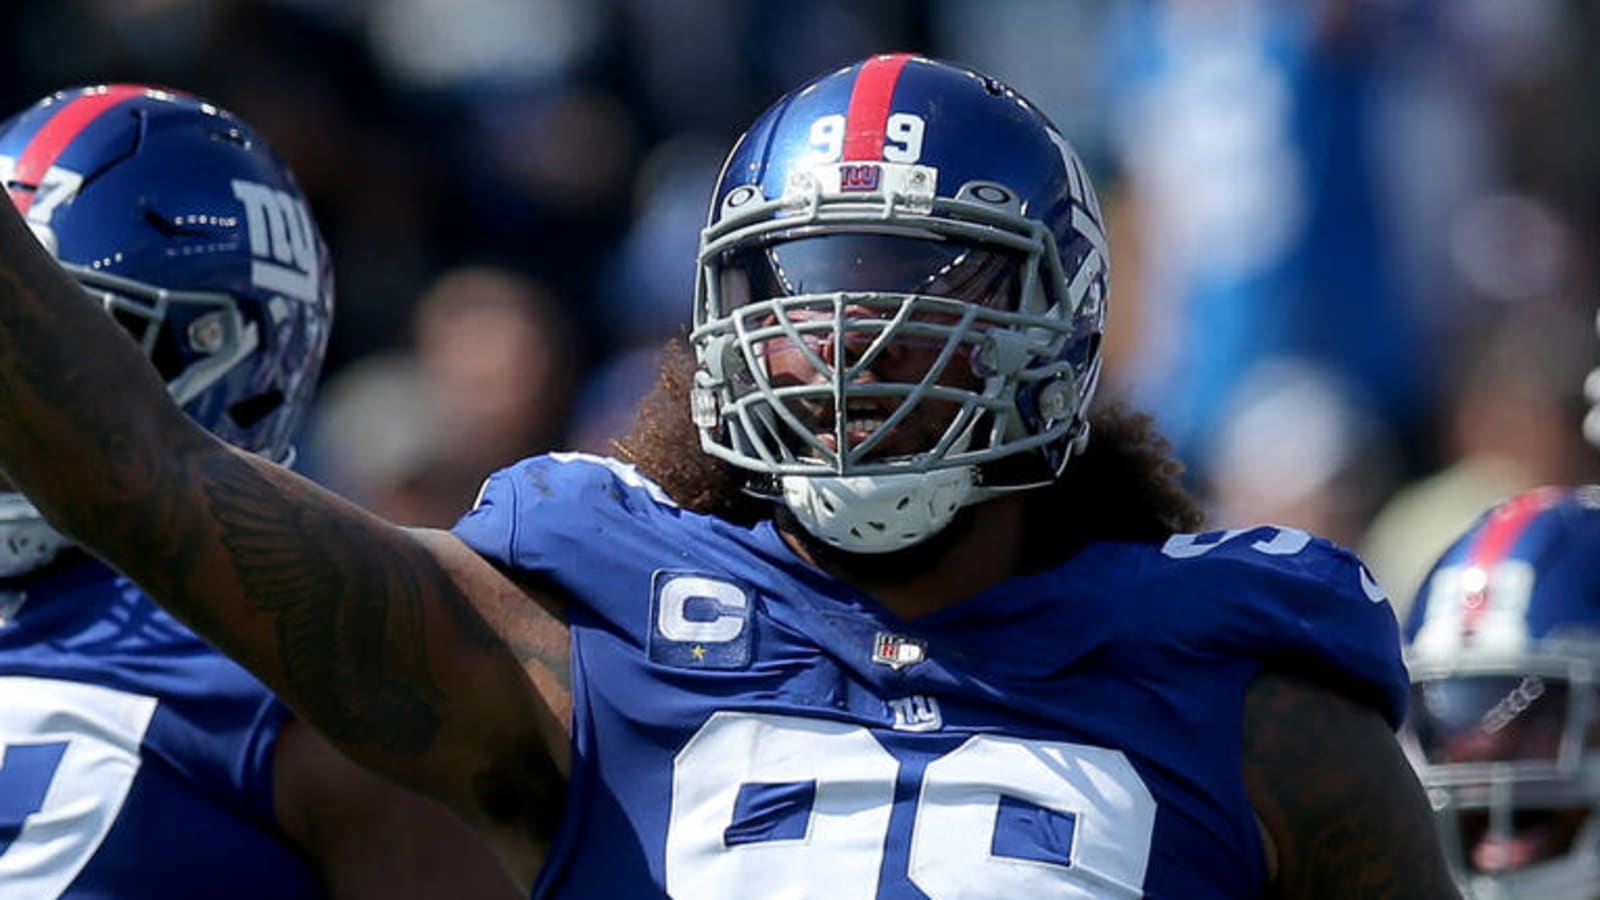 Giants DT Leonard Williams sprains MCL during Sunday's game